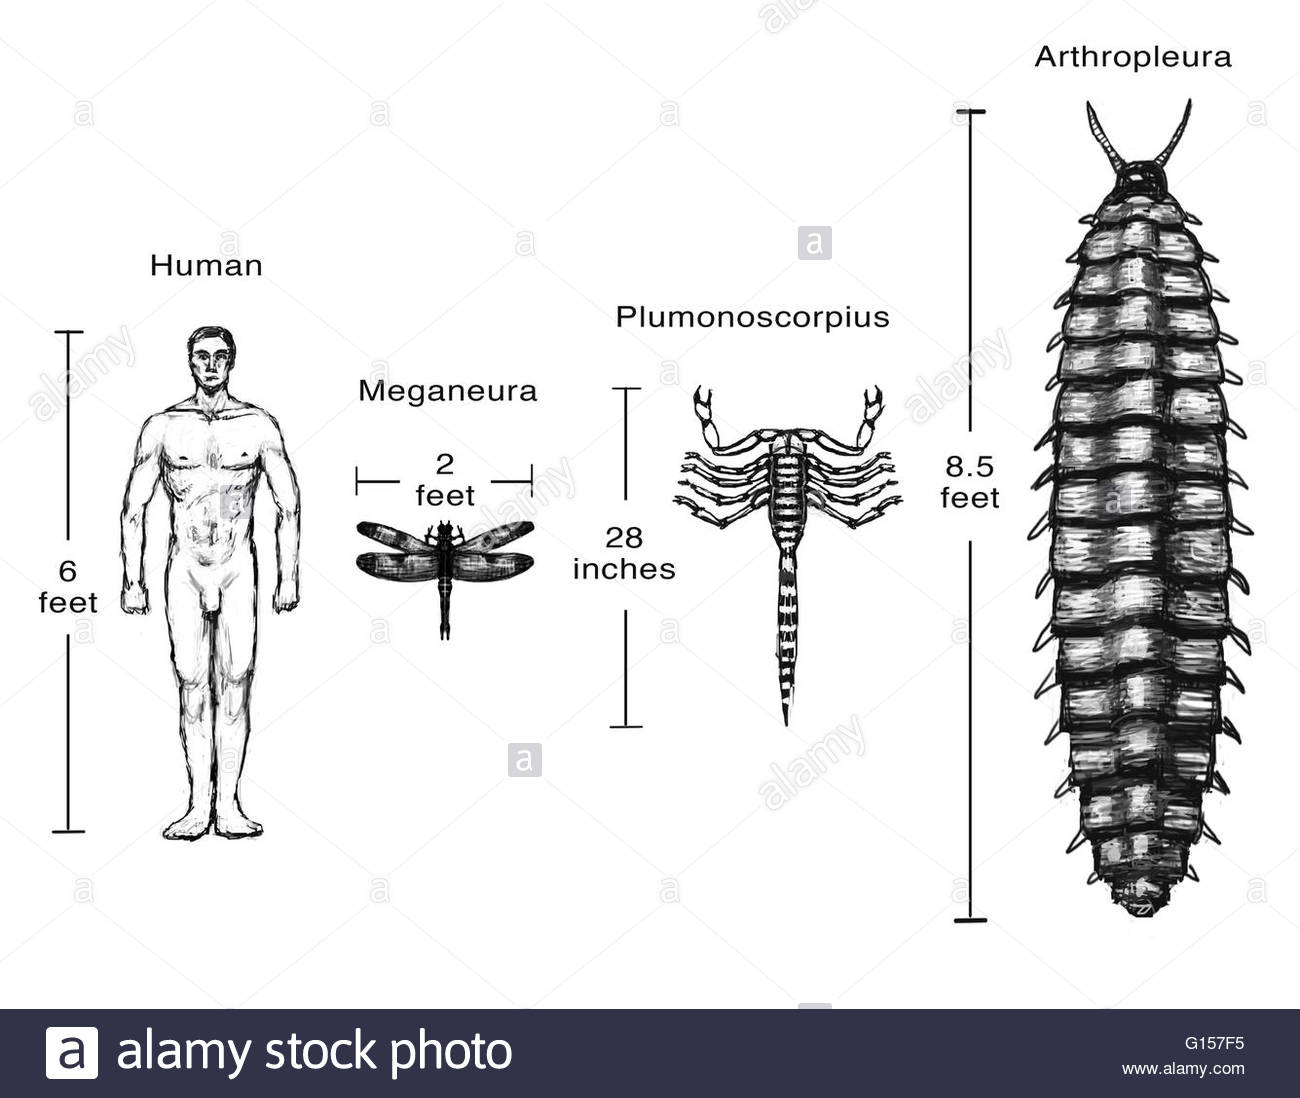 illustration-comparing-the-size-of-some-animals-from-the-carboniferous-G157F5.jpg